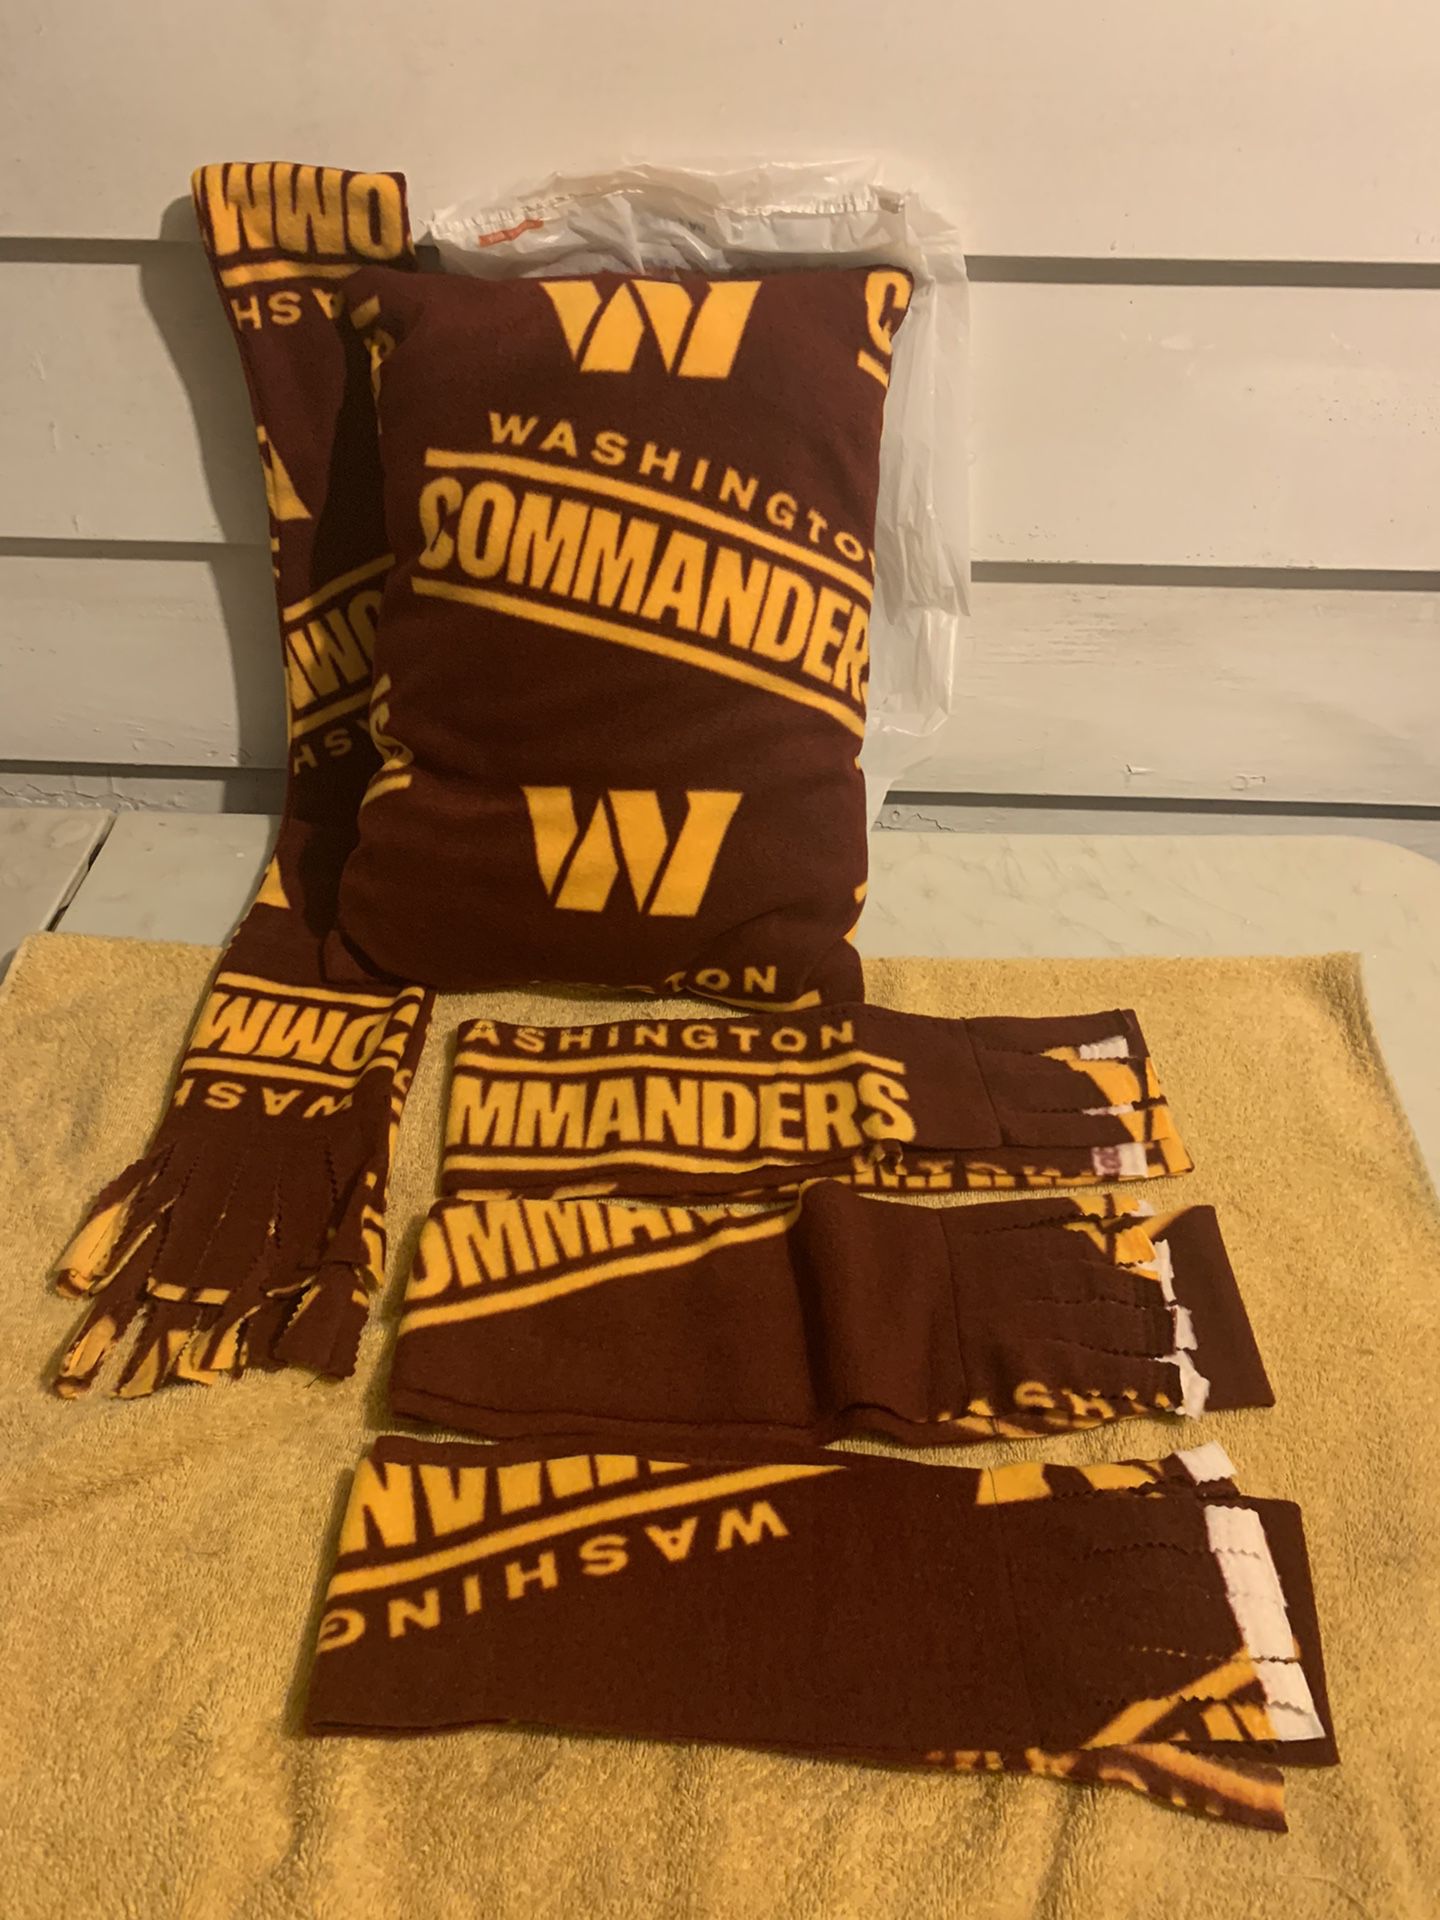 NFL BUNDLES (OF YOUR CHOICE) 1 Pillow/3scarves, $105; 1 Pillow/1 Scarf, $45; Pillow ONLY, $25; Scarf ONLY, $20   OTHER TEAMS AVAILABLE ! Machine Sewn,